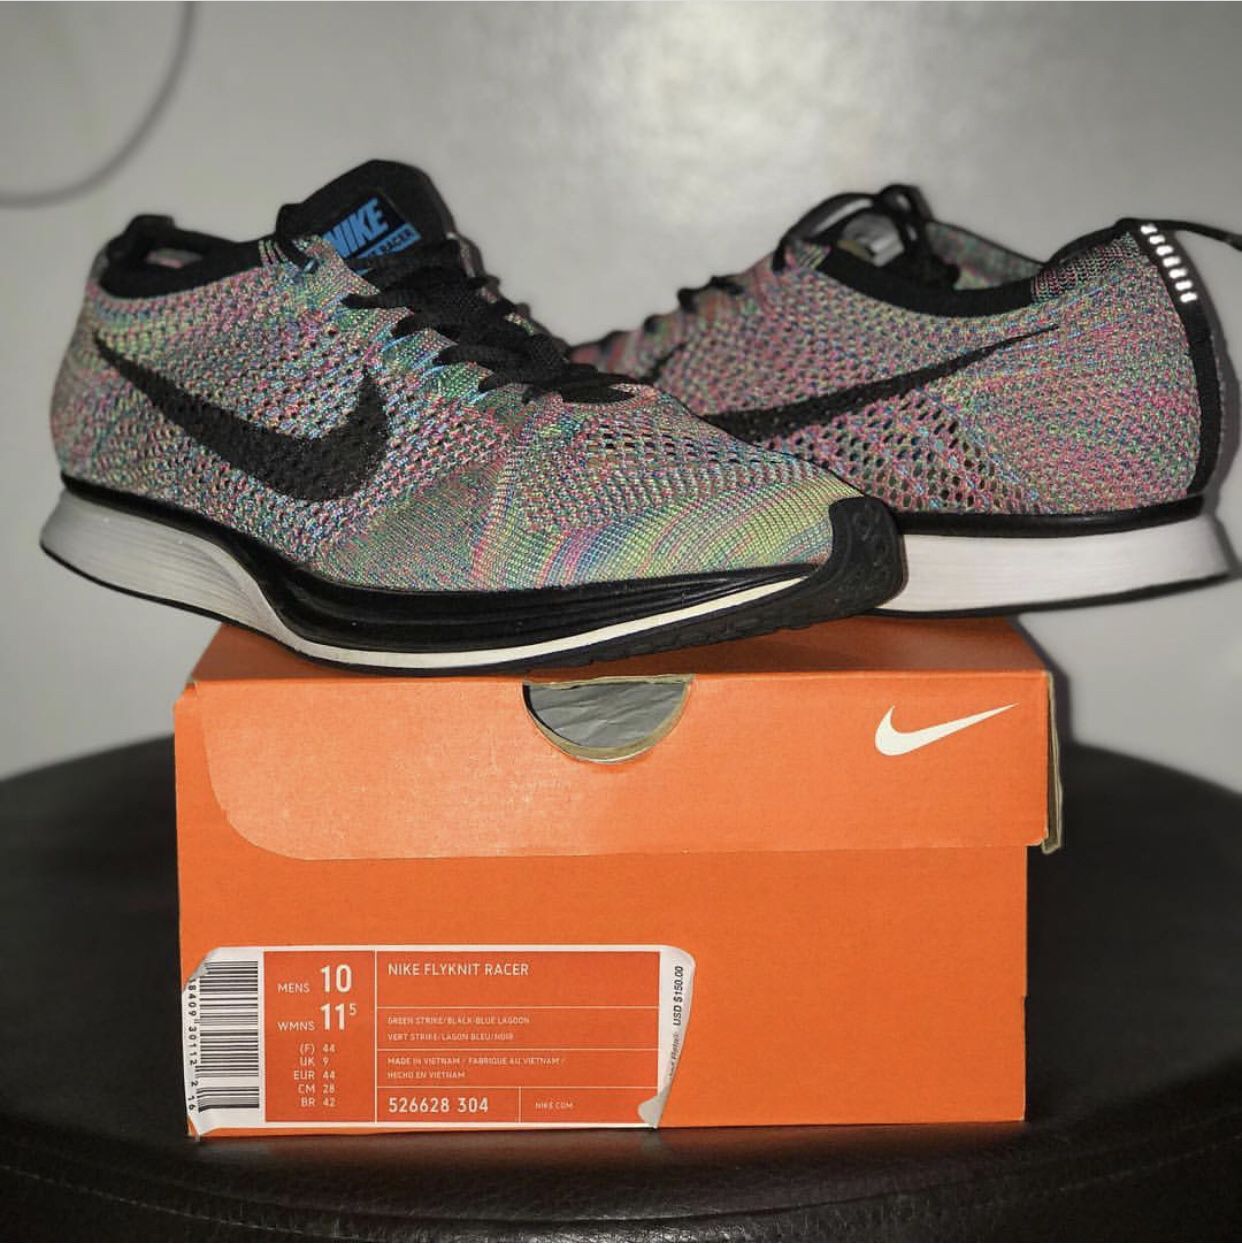 Worn once flyknit size 10